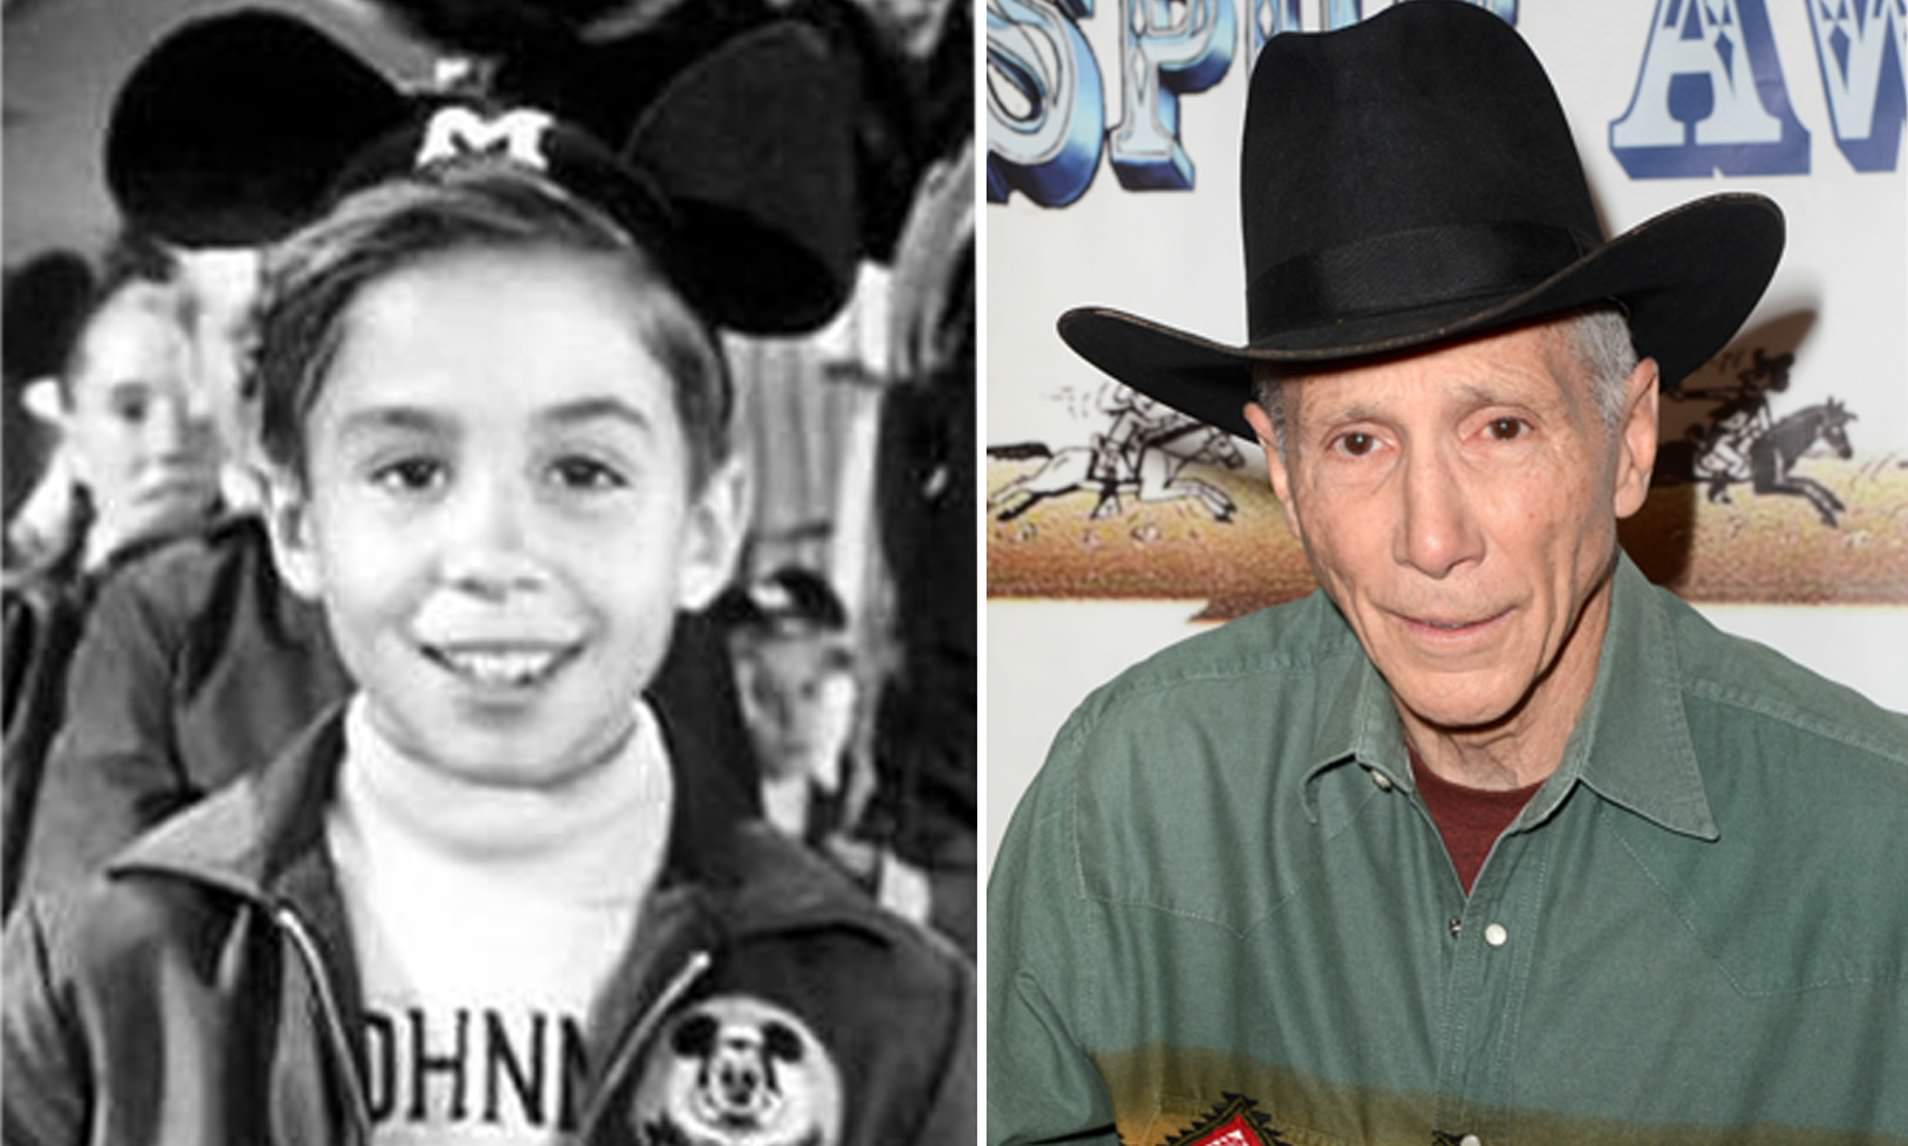 Former Mouseketeer and “The Rifleman” Co-Star Johnny Crawford Dead at 75.